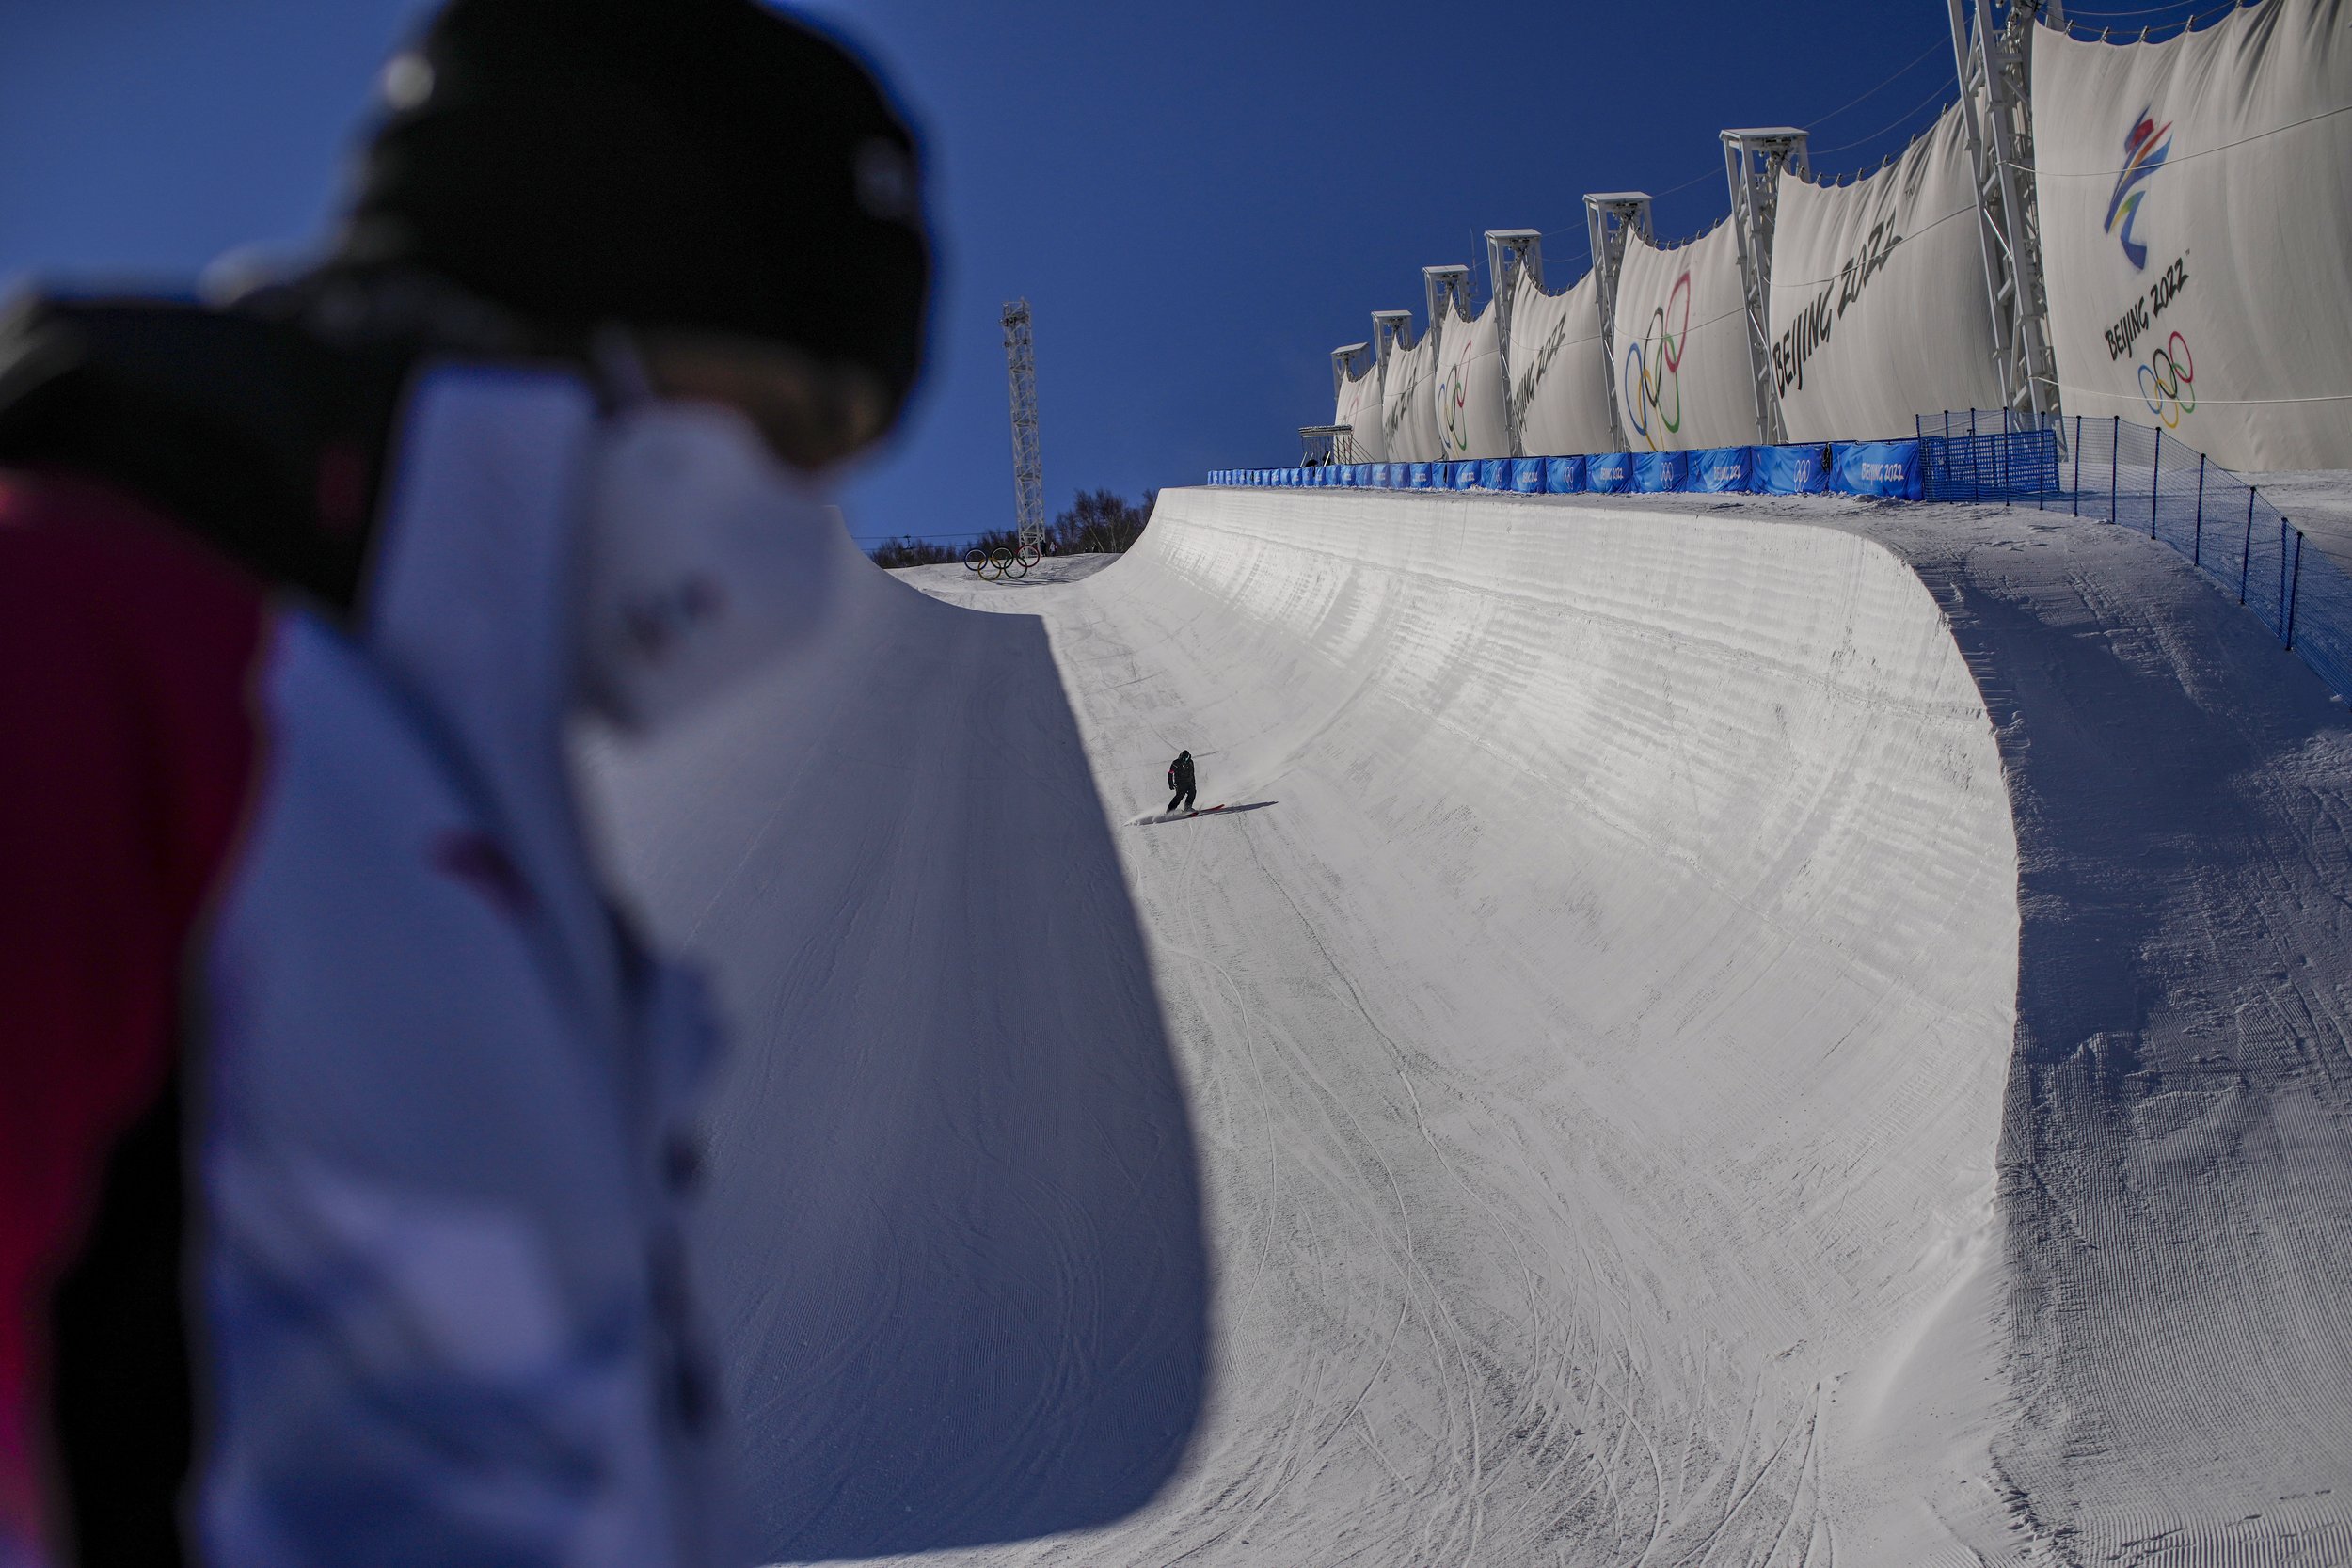  A skier trains on the half-pipe ahead of the 2022 Winter Olympics, Tuesday, Feb. 1, 2022, in Zhangjiakou, China. (AP Photo/Francisco Seco) 